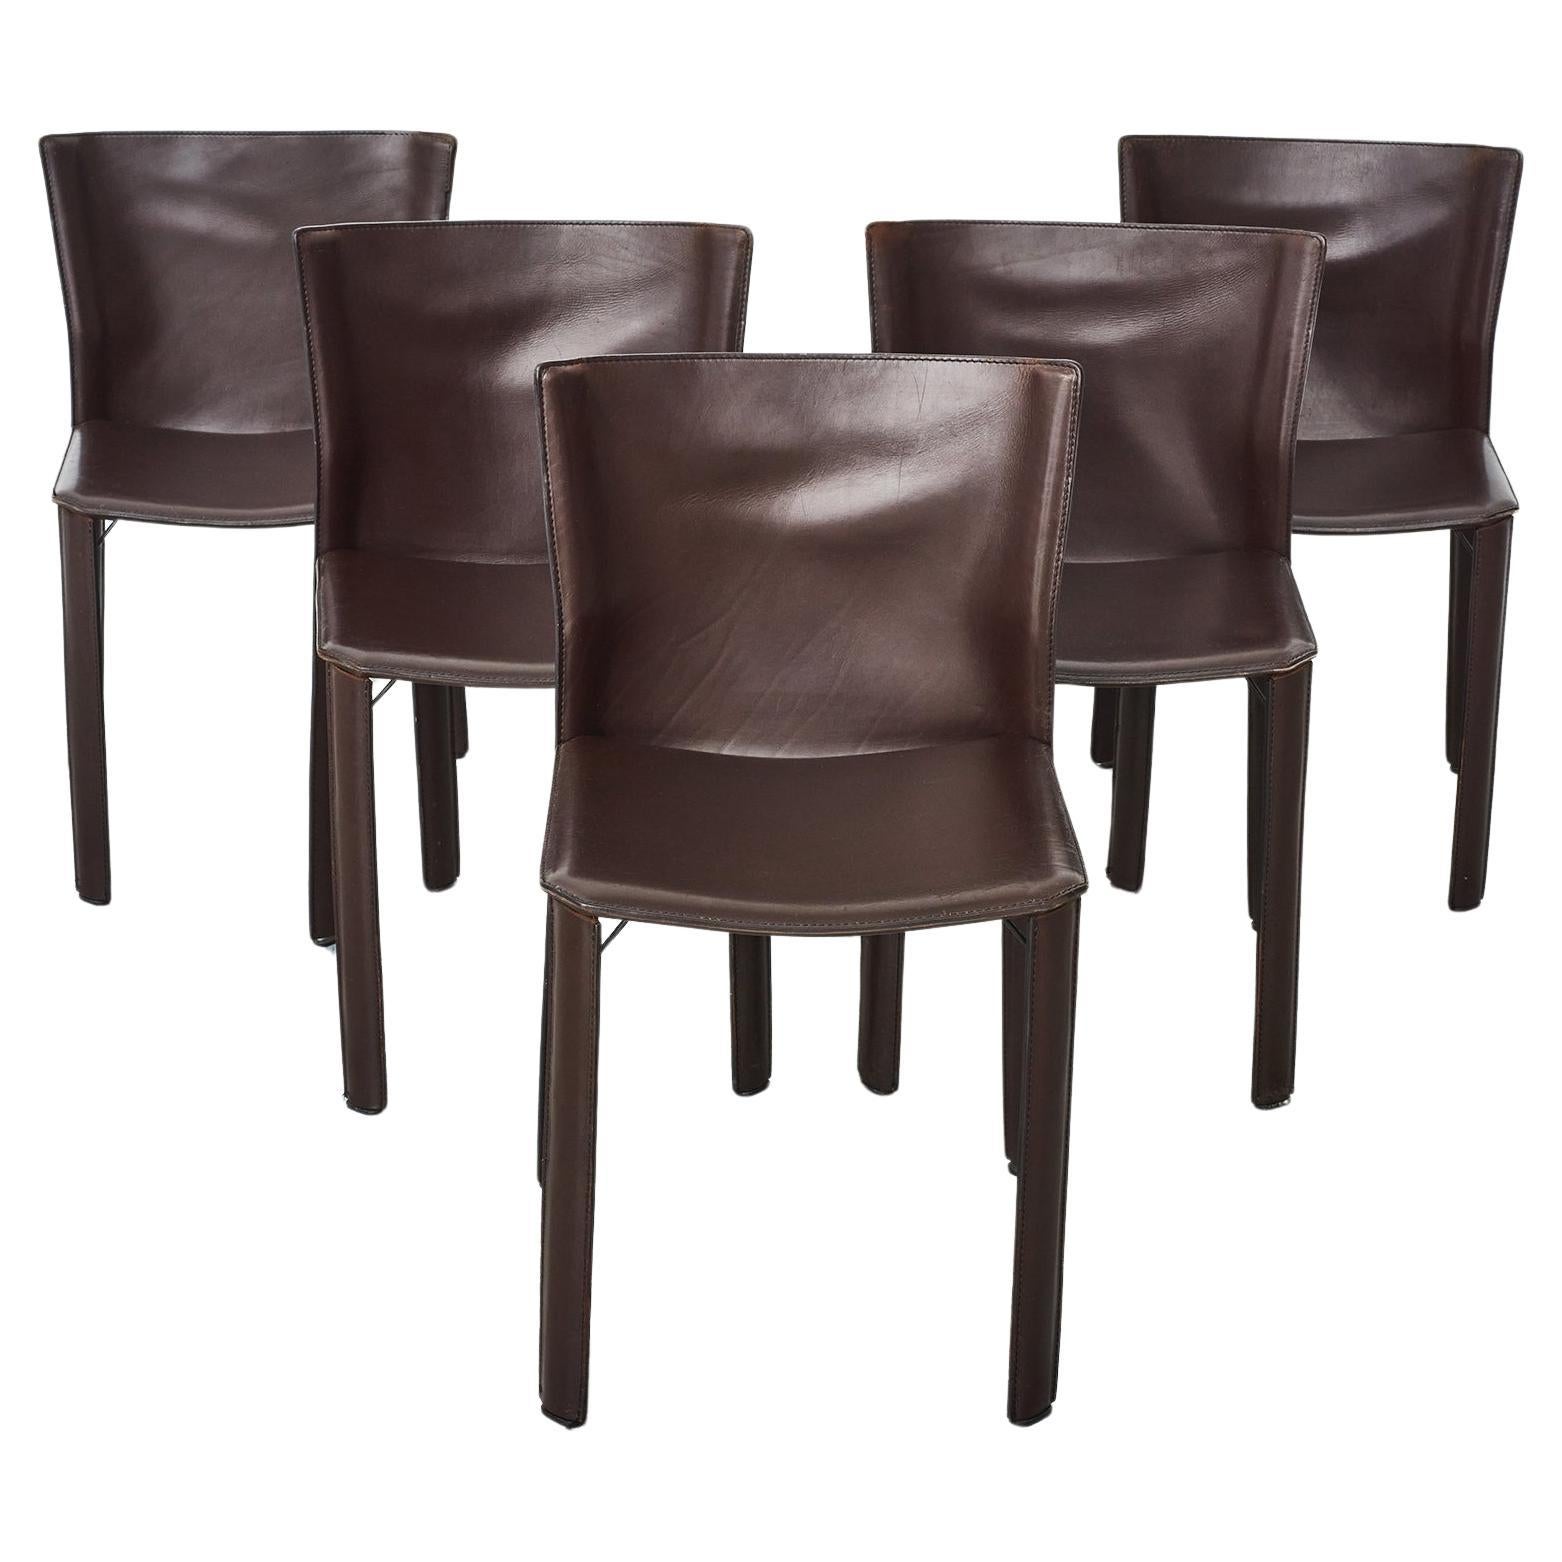 Set of 5 dark brown leather dining chairs For Sale